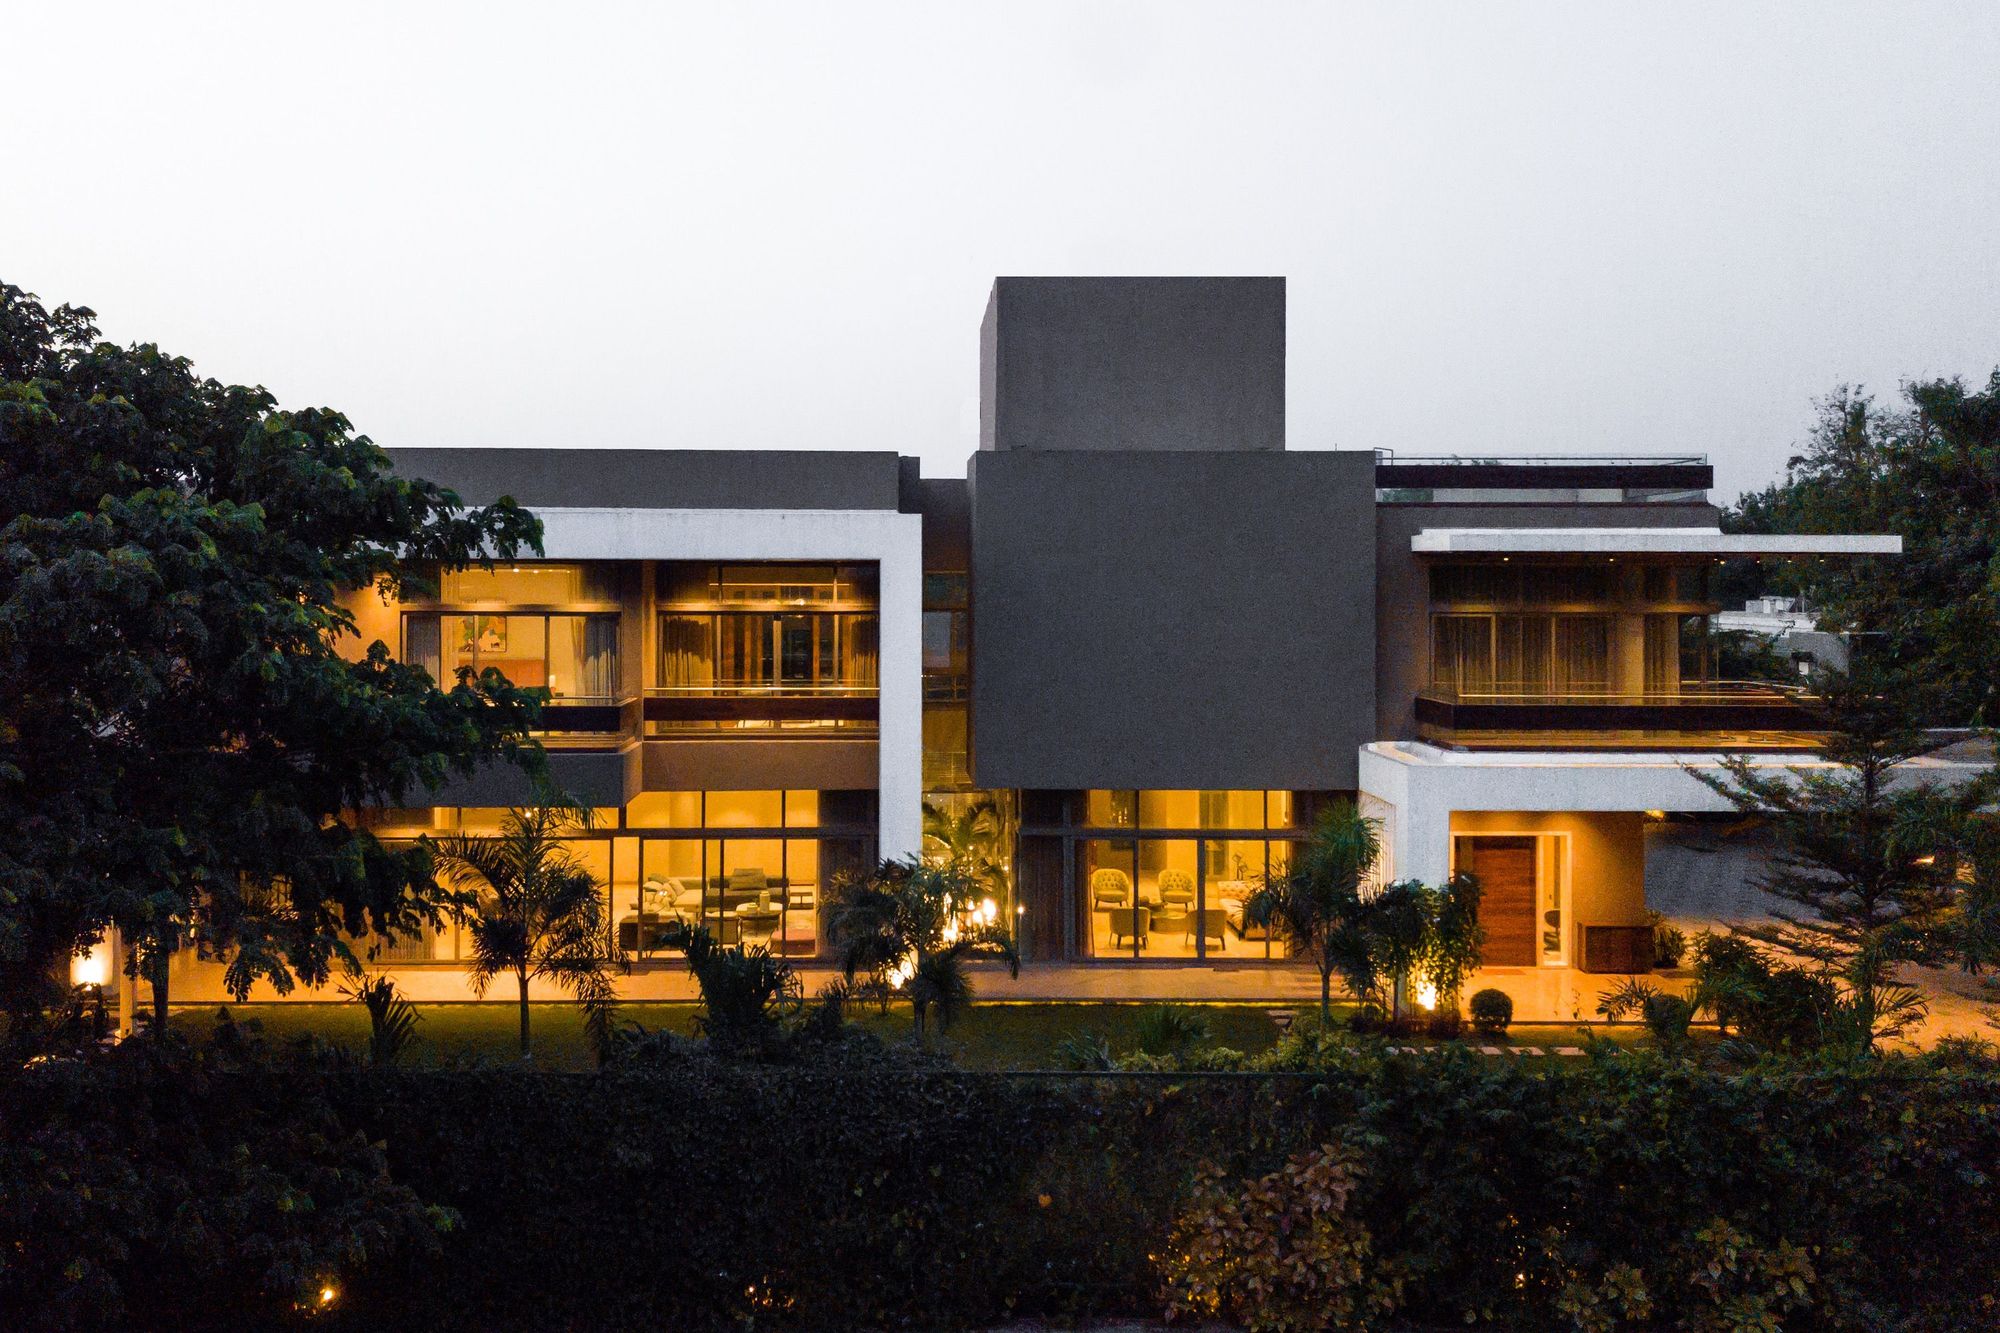 Nestled amidst dense greenery, this villa mindfully tackles the extreme climate of Ahmedabad